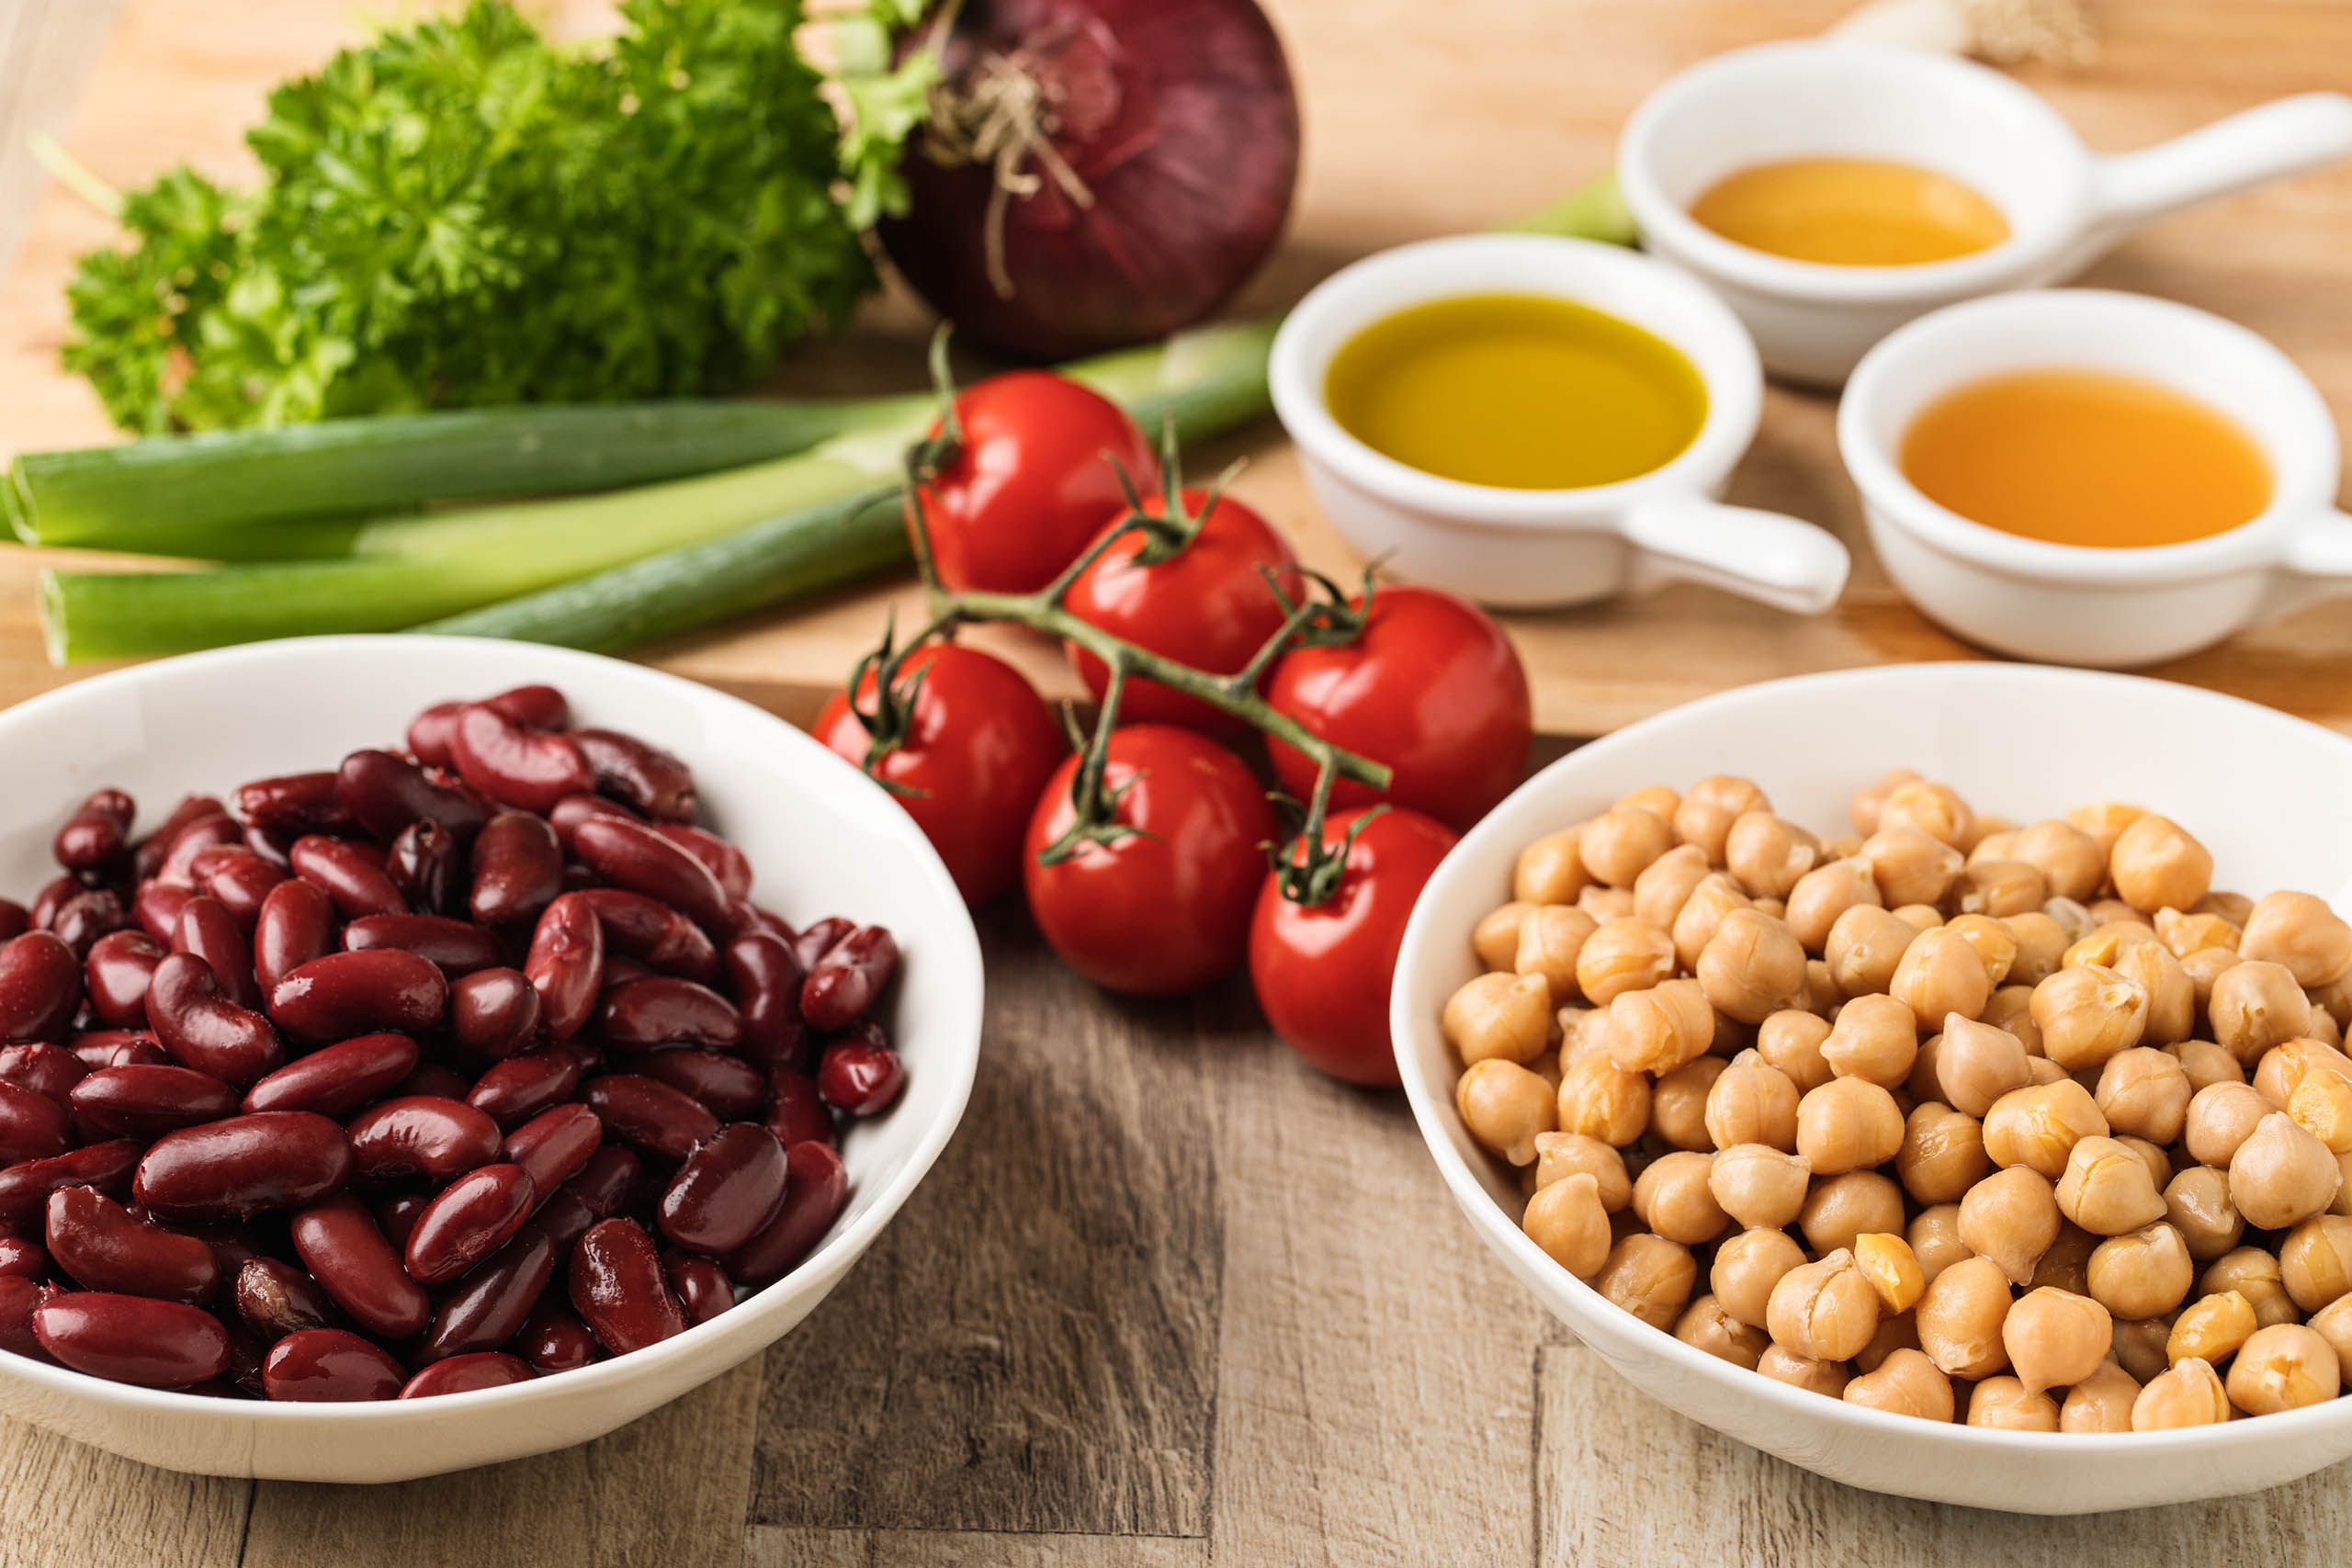 ingredients for chickpea and bean salad